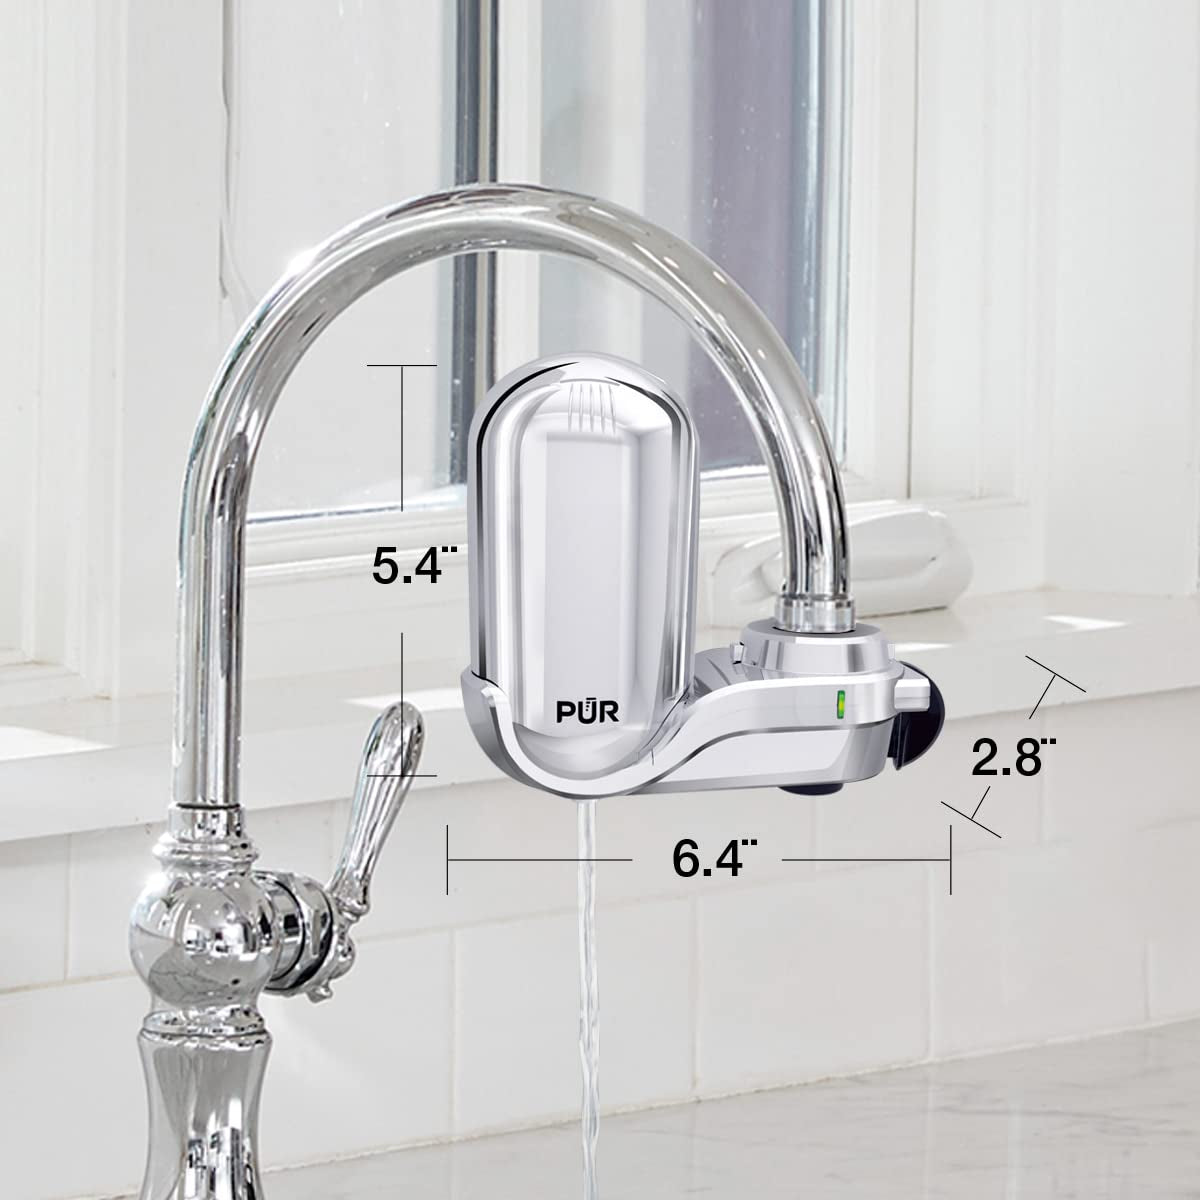 plus Faucet Mount Water Filtration System, Chrome – Vertical Faucet Mount Water Filter for Sink – Crisp, Great-Tasting Filtered Water, FM3700